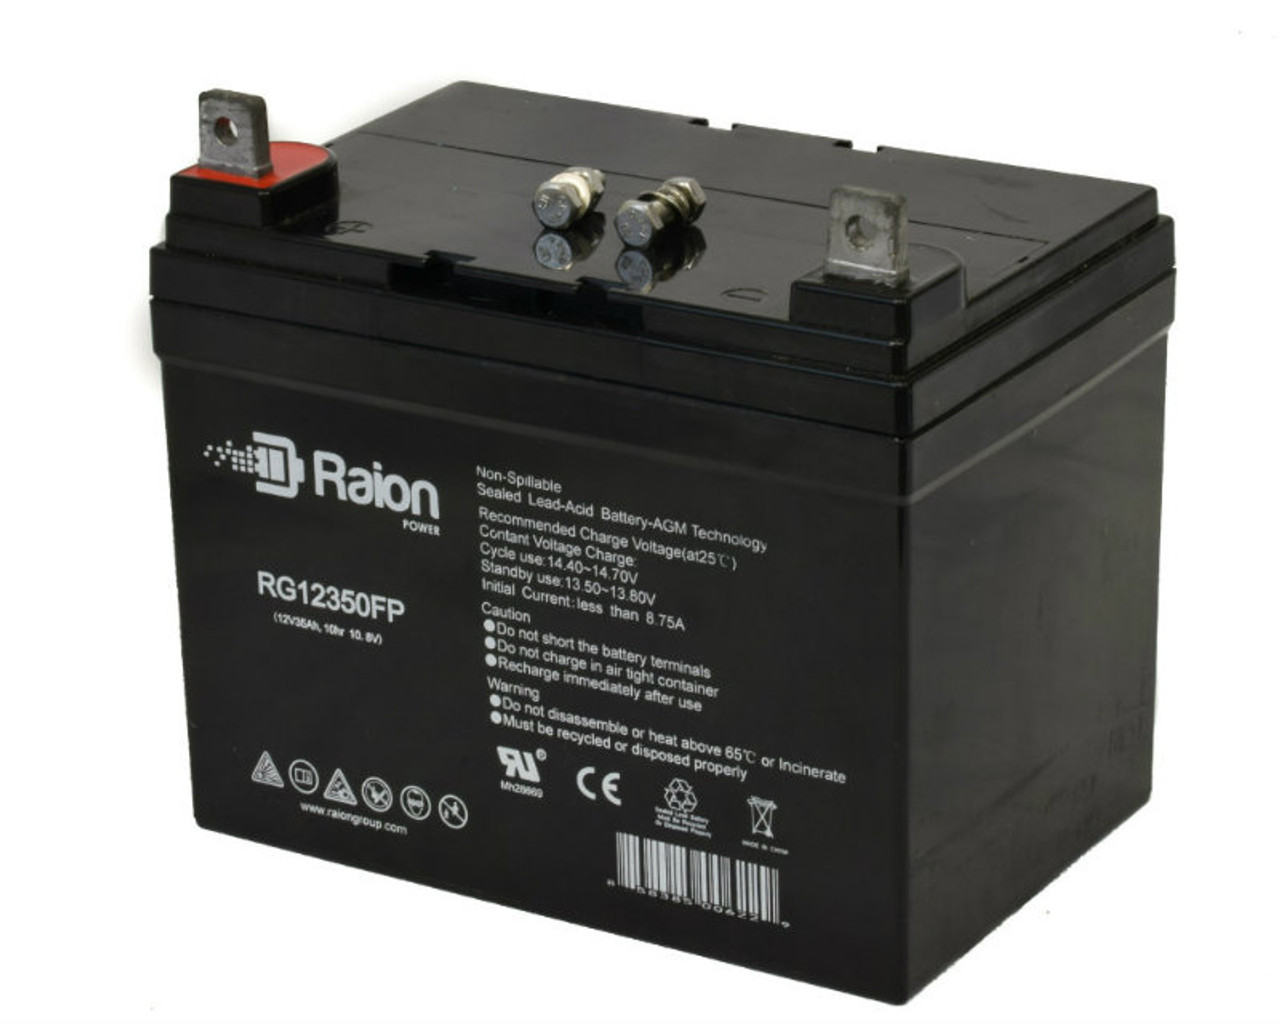 Raion Power Replacement 12V 35Ah Battery for Toro 41876 - 1 Pack